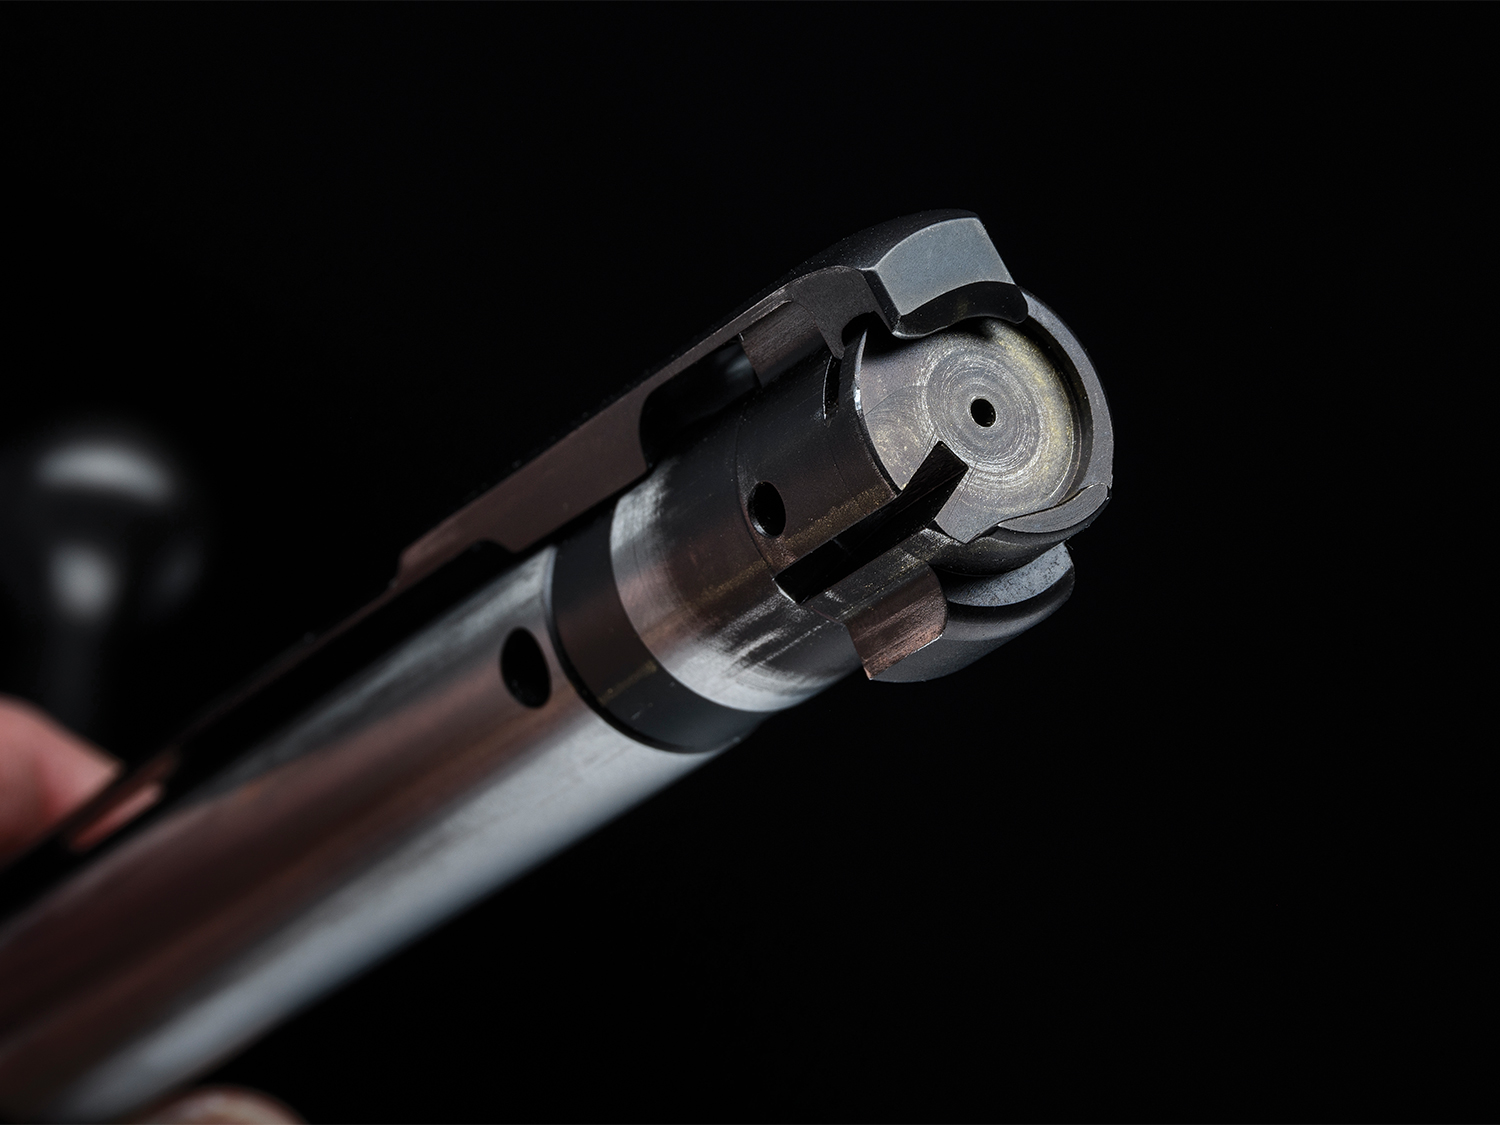 the iconic Mauser claw extractor